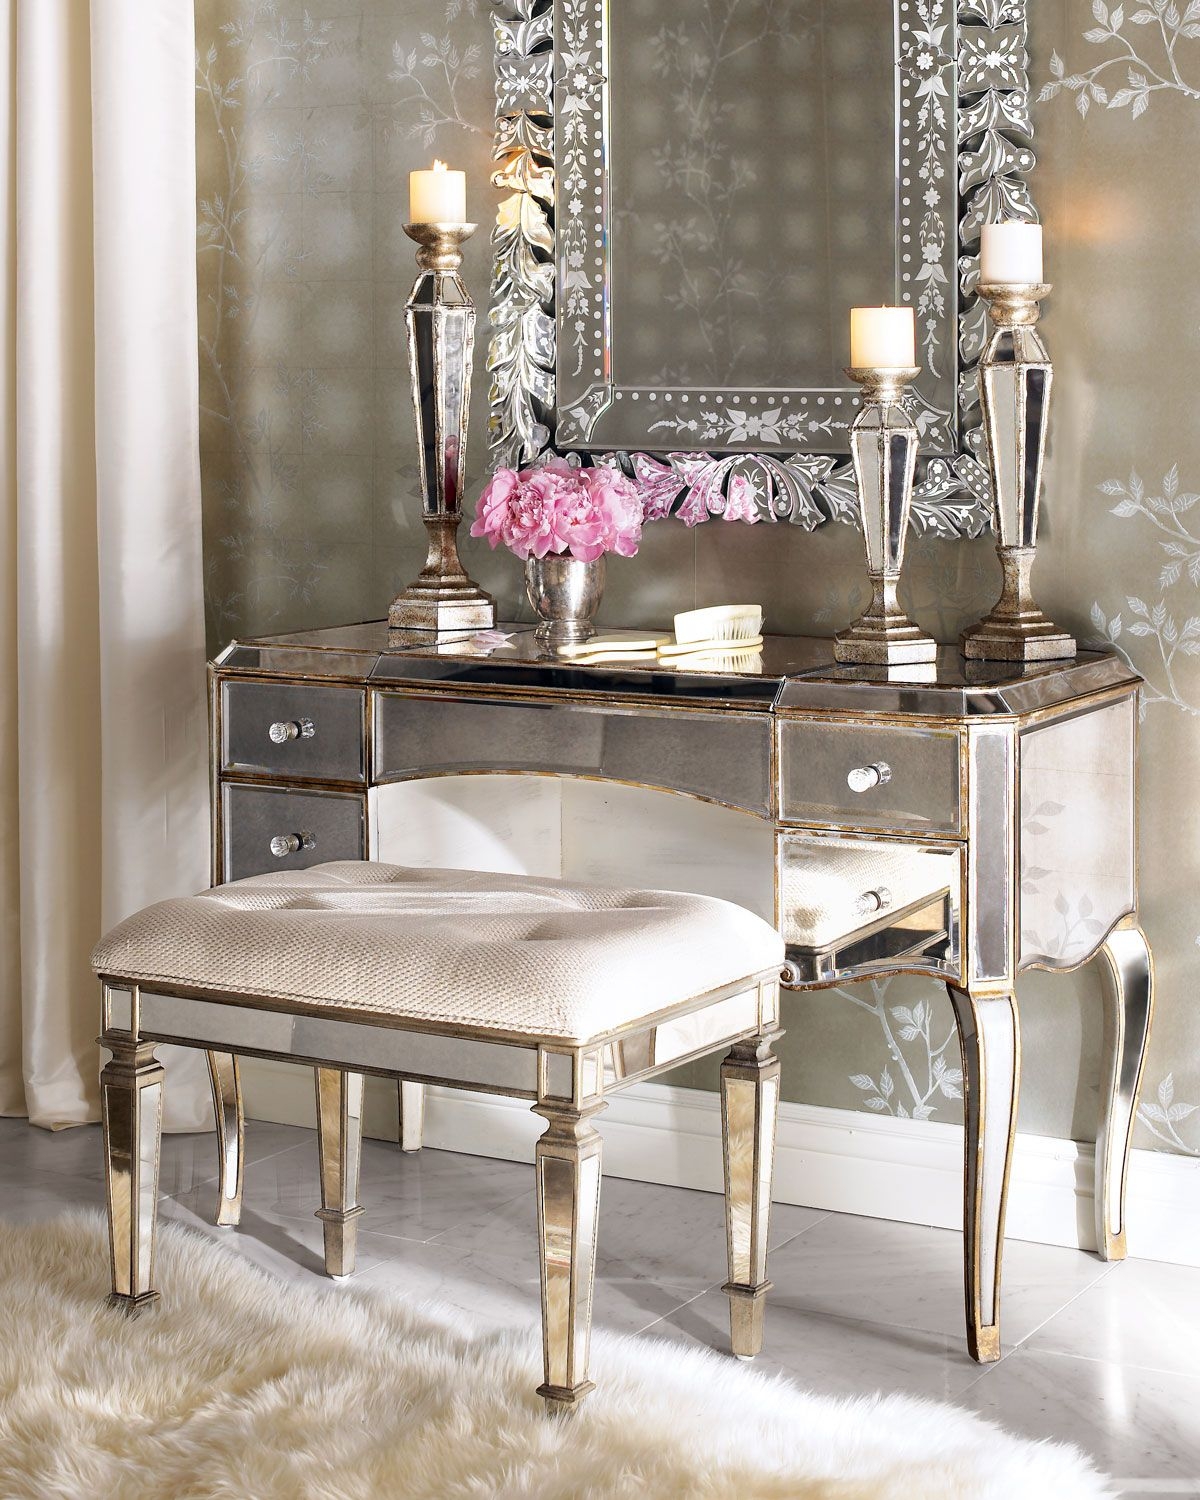 teenager dressing table